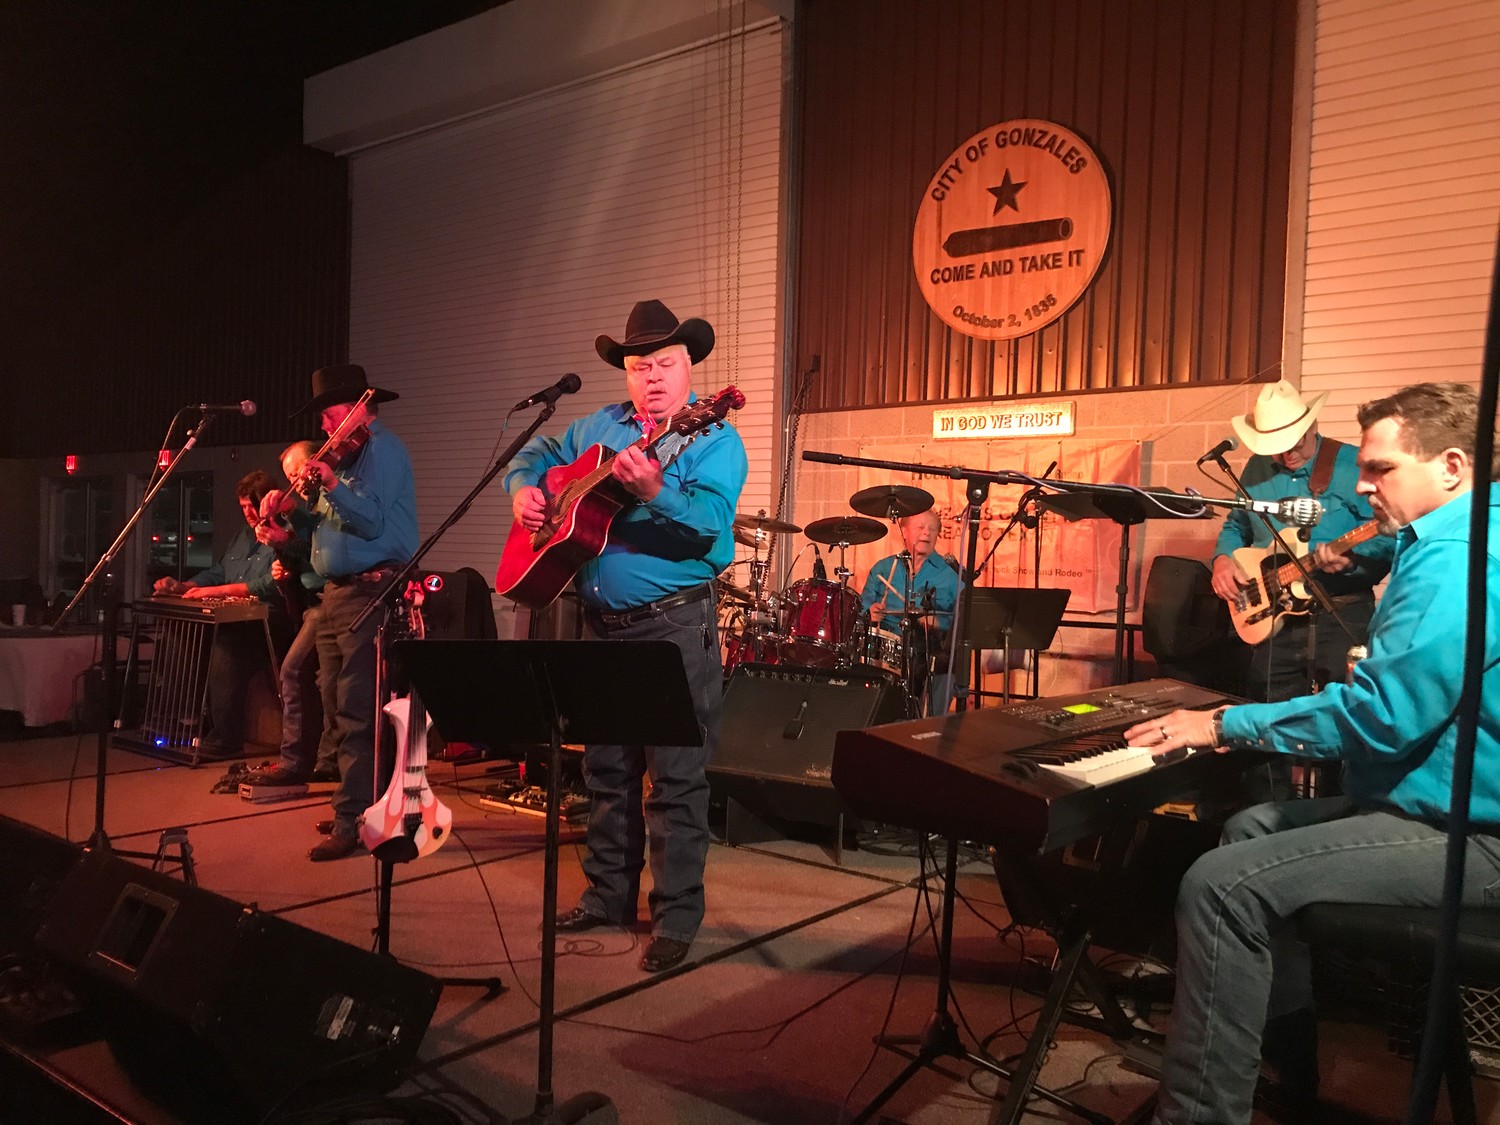 The Can’t Hardly Play Boys was the band for the annual Go Texan fundraiser on Saturday.